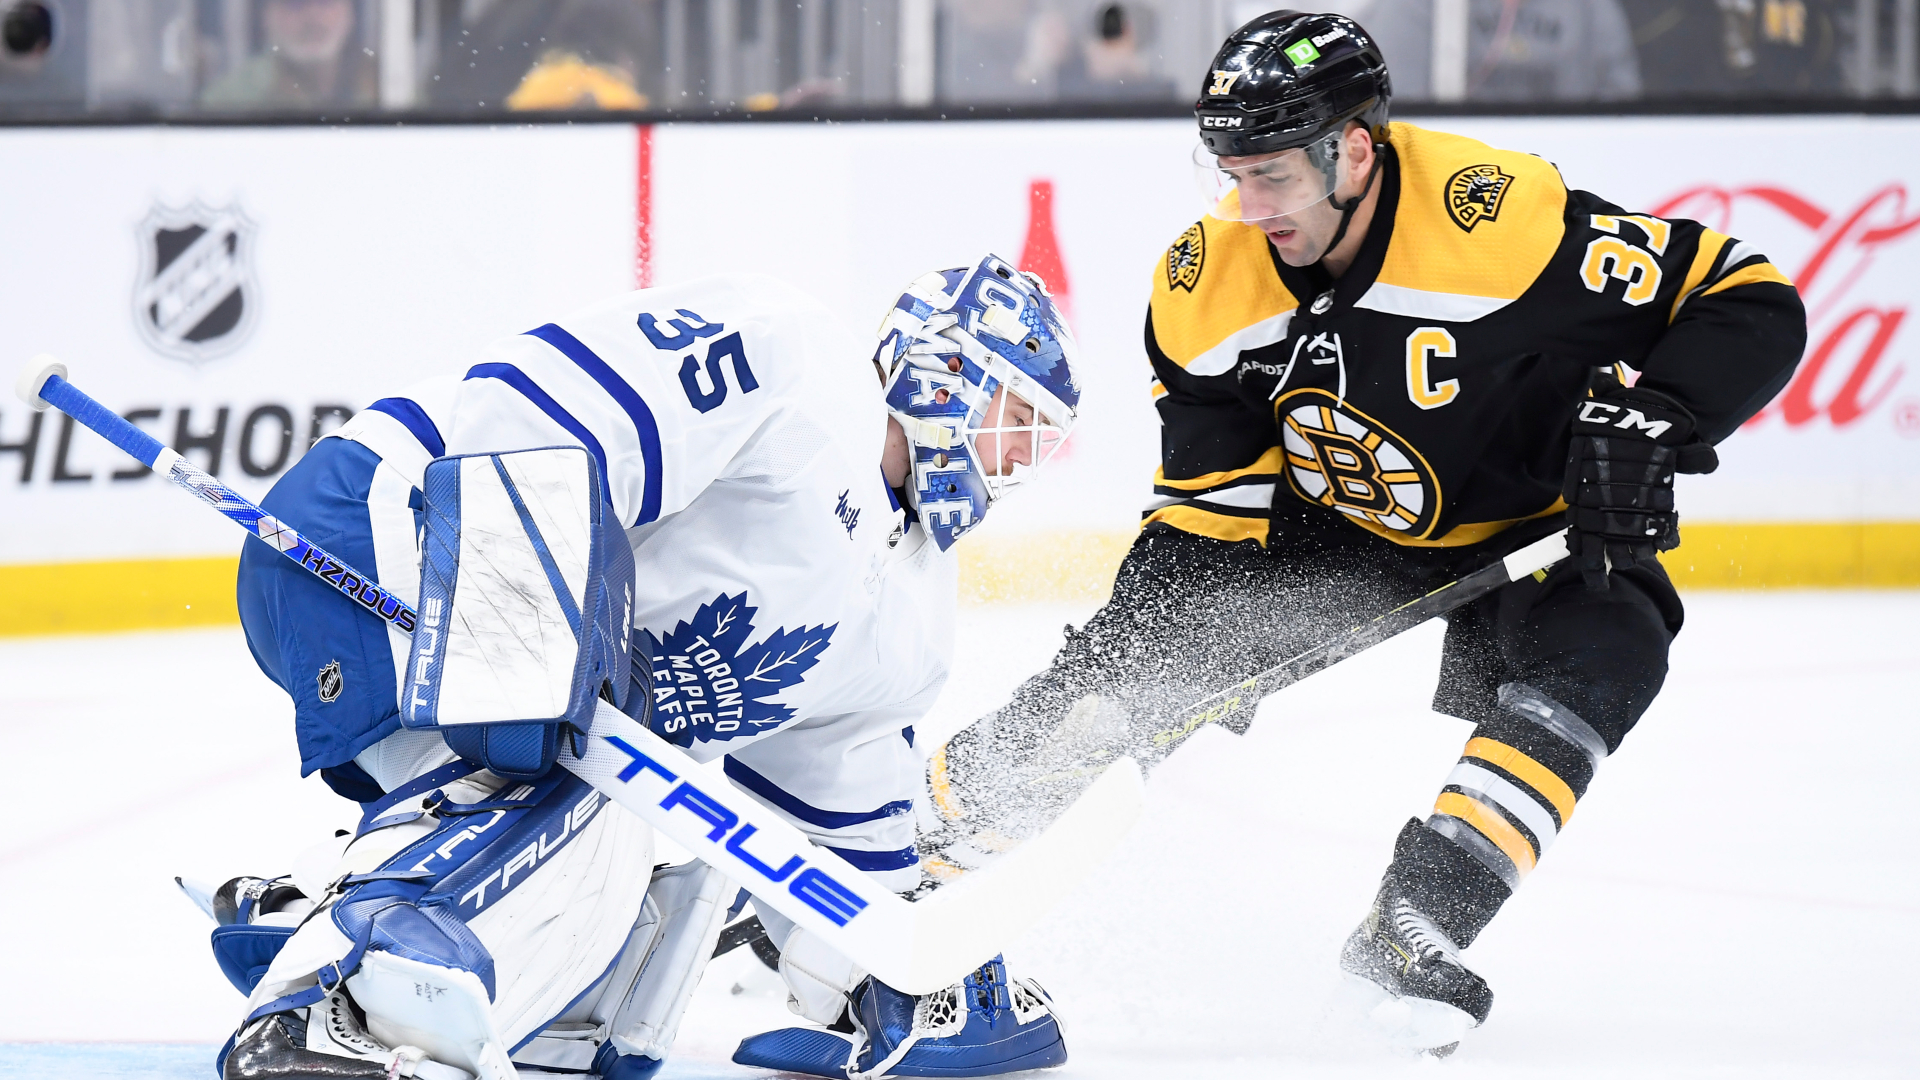 Pastrnak serves as key chess piece as Bruins even series with Leafs